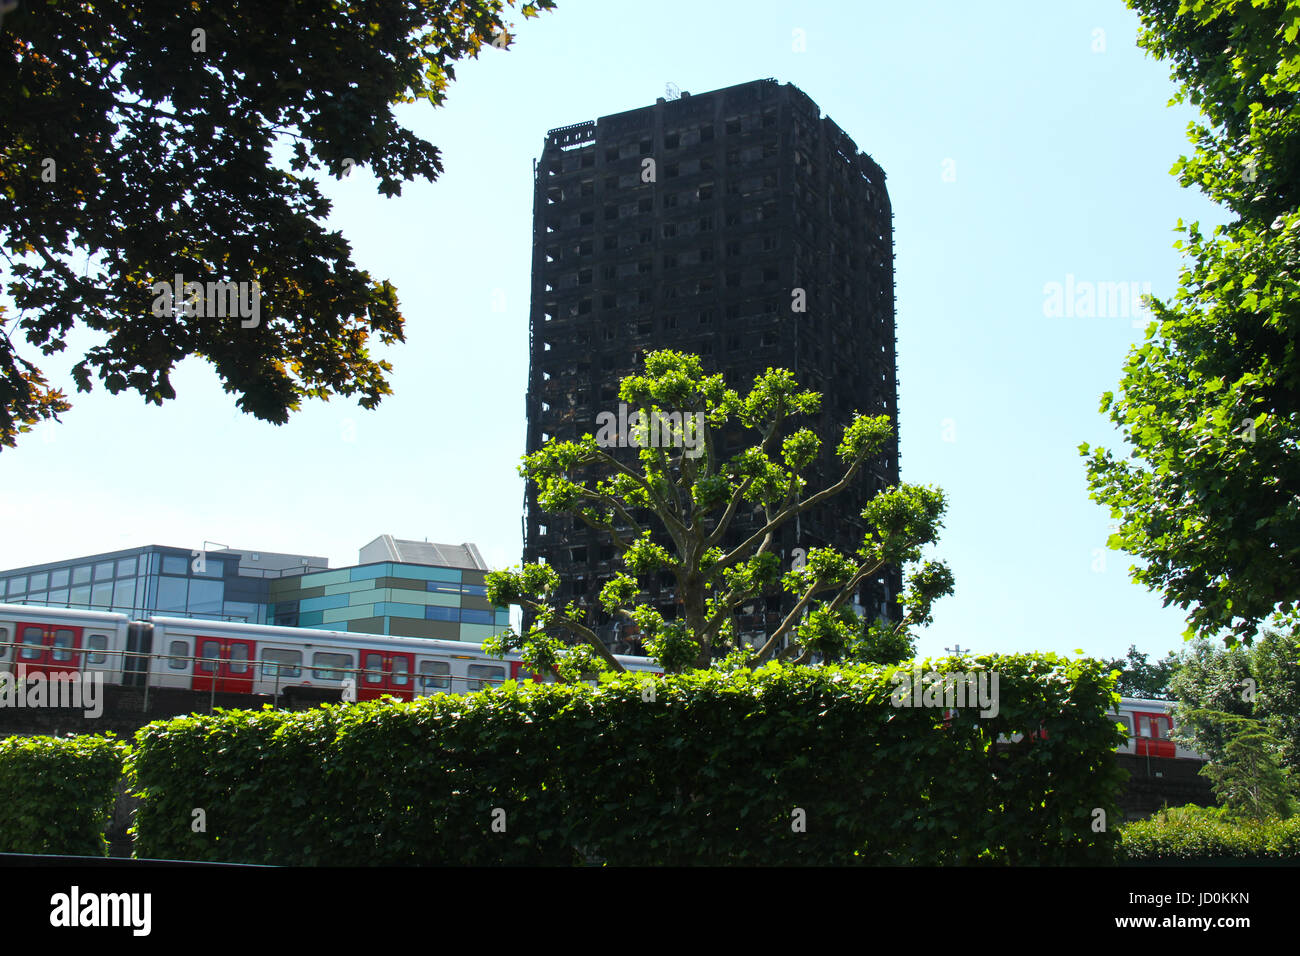 London, UK. 16th June, 2017. A tube train from Latimer Statin speeds on the tracks below the charred remains of the 24-storey block Grenfell tower block. At least 30 people have bene confirmed dead with about 70 missing and feared dead. Credit: David Mbiyu/Alamy Live News  Stock Photo